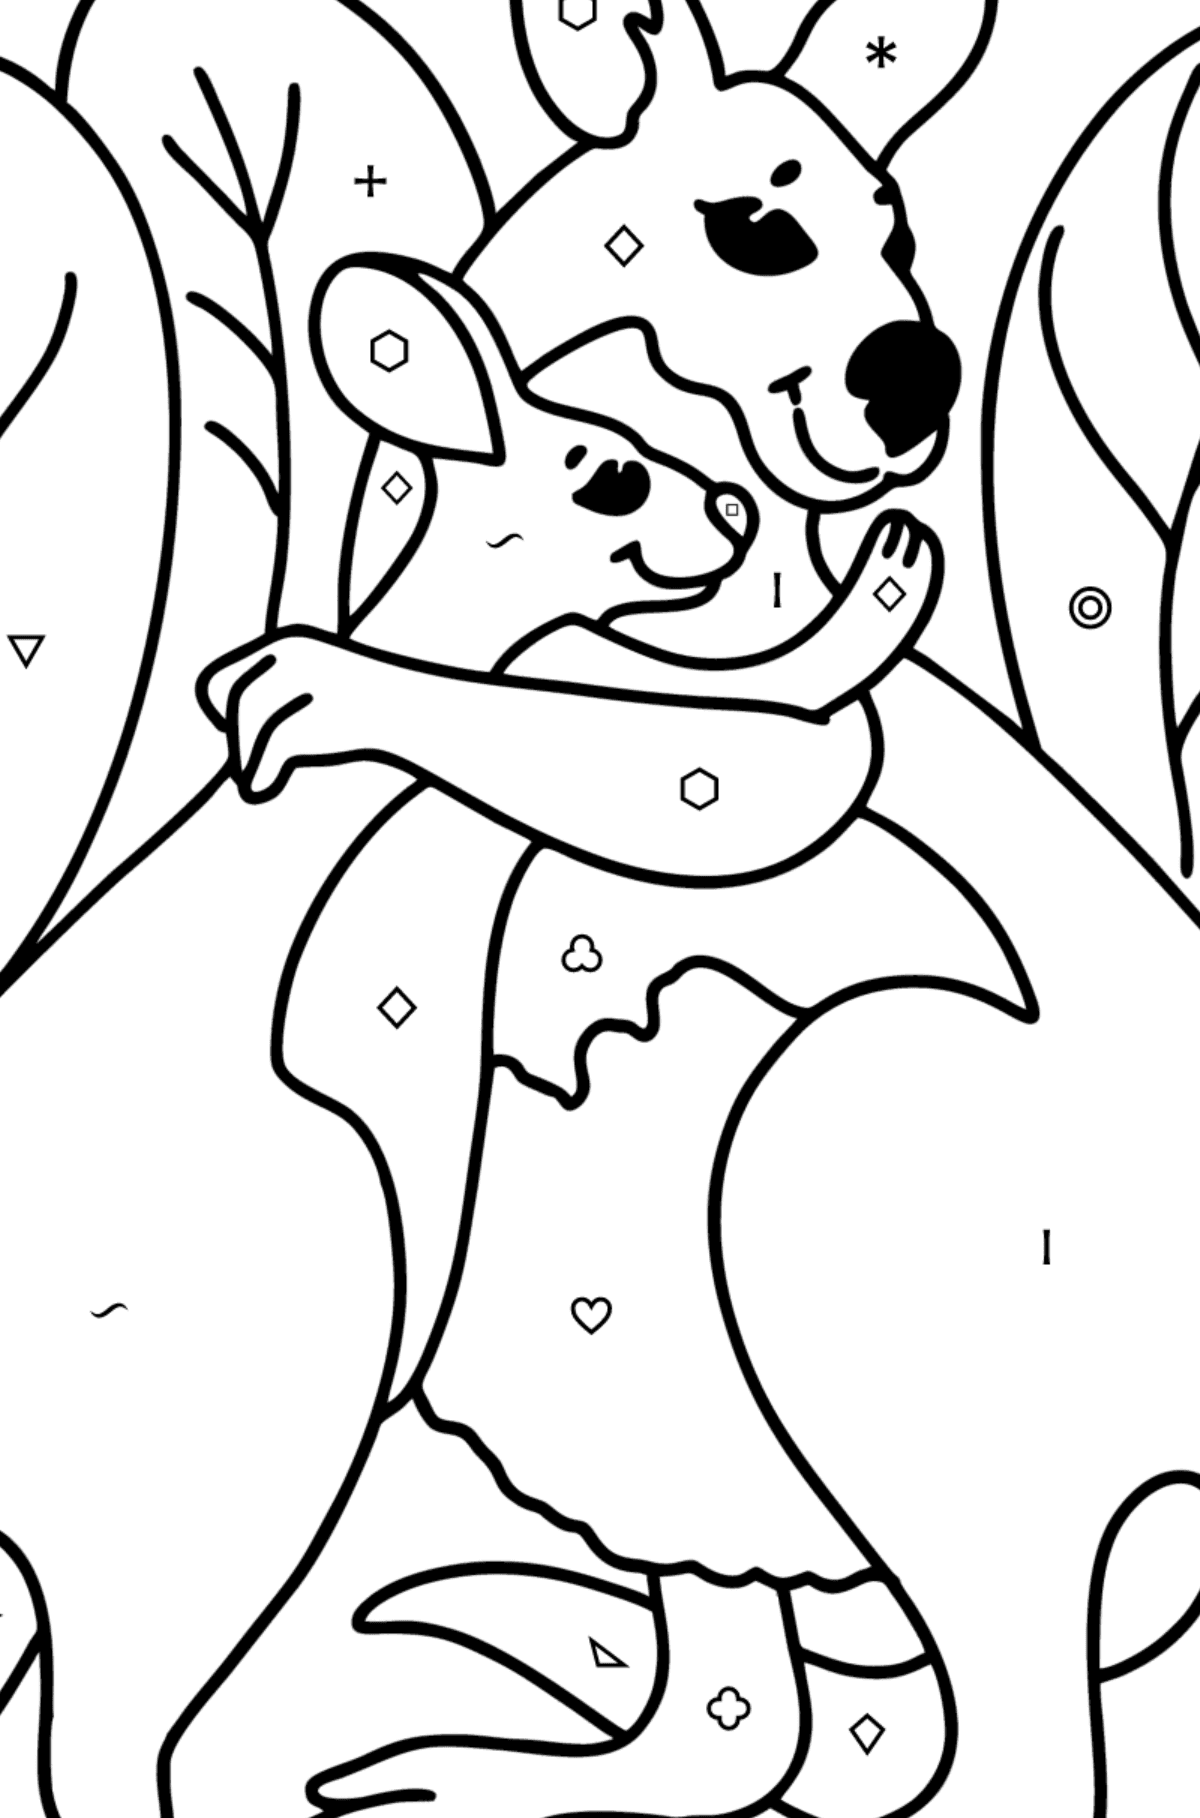 Coloring page - cute kangaroo - Coloring by Symbols and Geometric Shapes for Kids